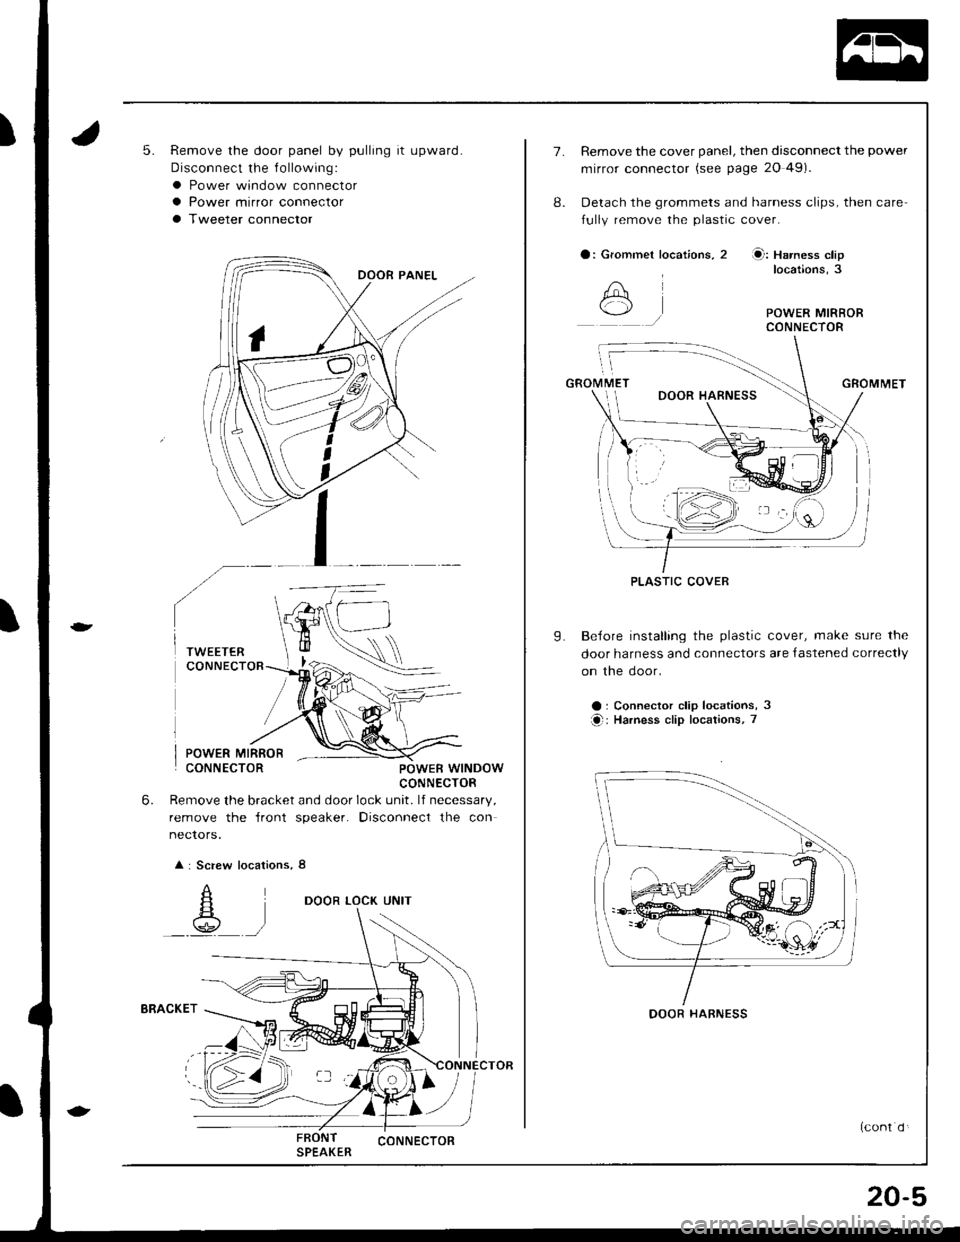 HONDA INTEGRA 1998 4.G Workshop Manual 5.Remove the door panel by pulling it upward.
Disconnect the f ollowing:
a Power window connectora Power mirror connector
a Tweeter connector
POWER MIRRORCONNECTORPOWEB WINDOWCONNECTOR
Remove the brac